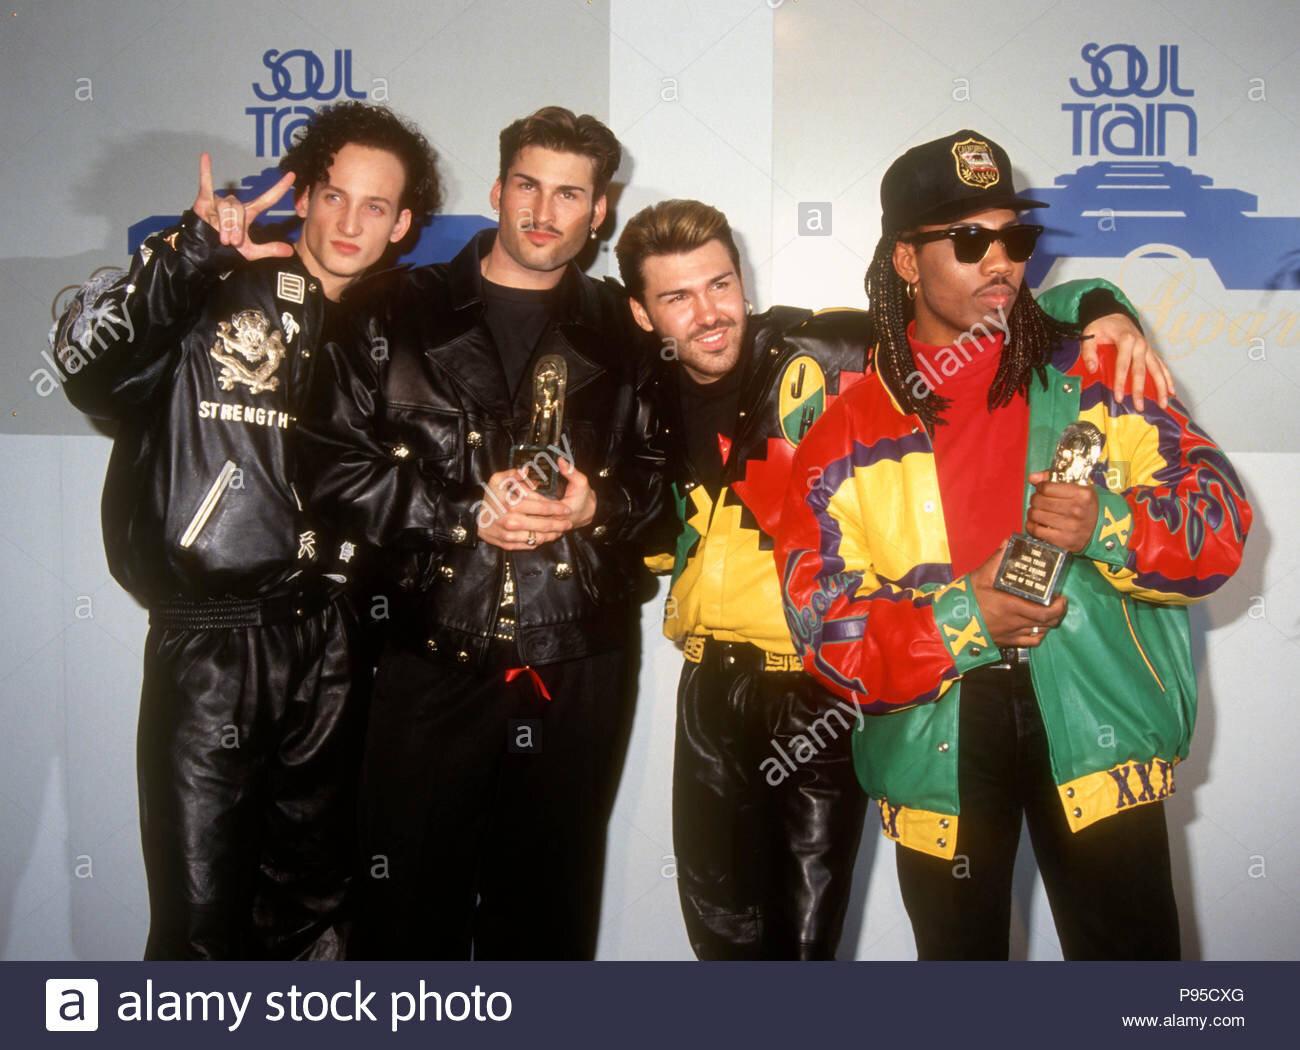 los-angeles-ca-march-10-color-me-badd-attends-the-sixth-annual-soul-train-music-awards-on-march-10-1992-at-the-shrine-auditorium-in-los-angeles-california-photo-by-barry-kingalamy-stock-photo-P95CXG.jpg